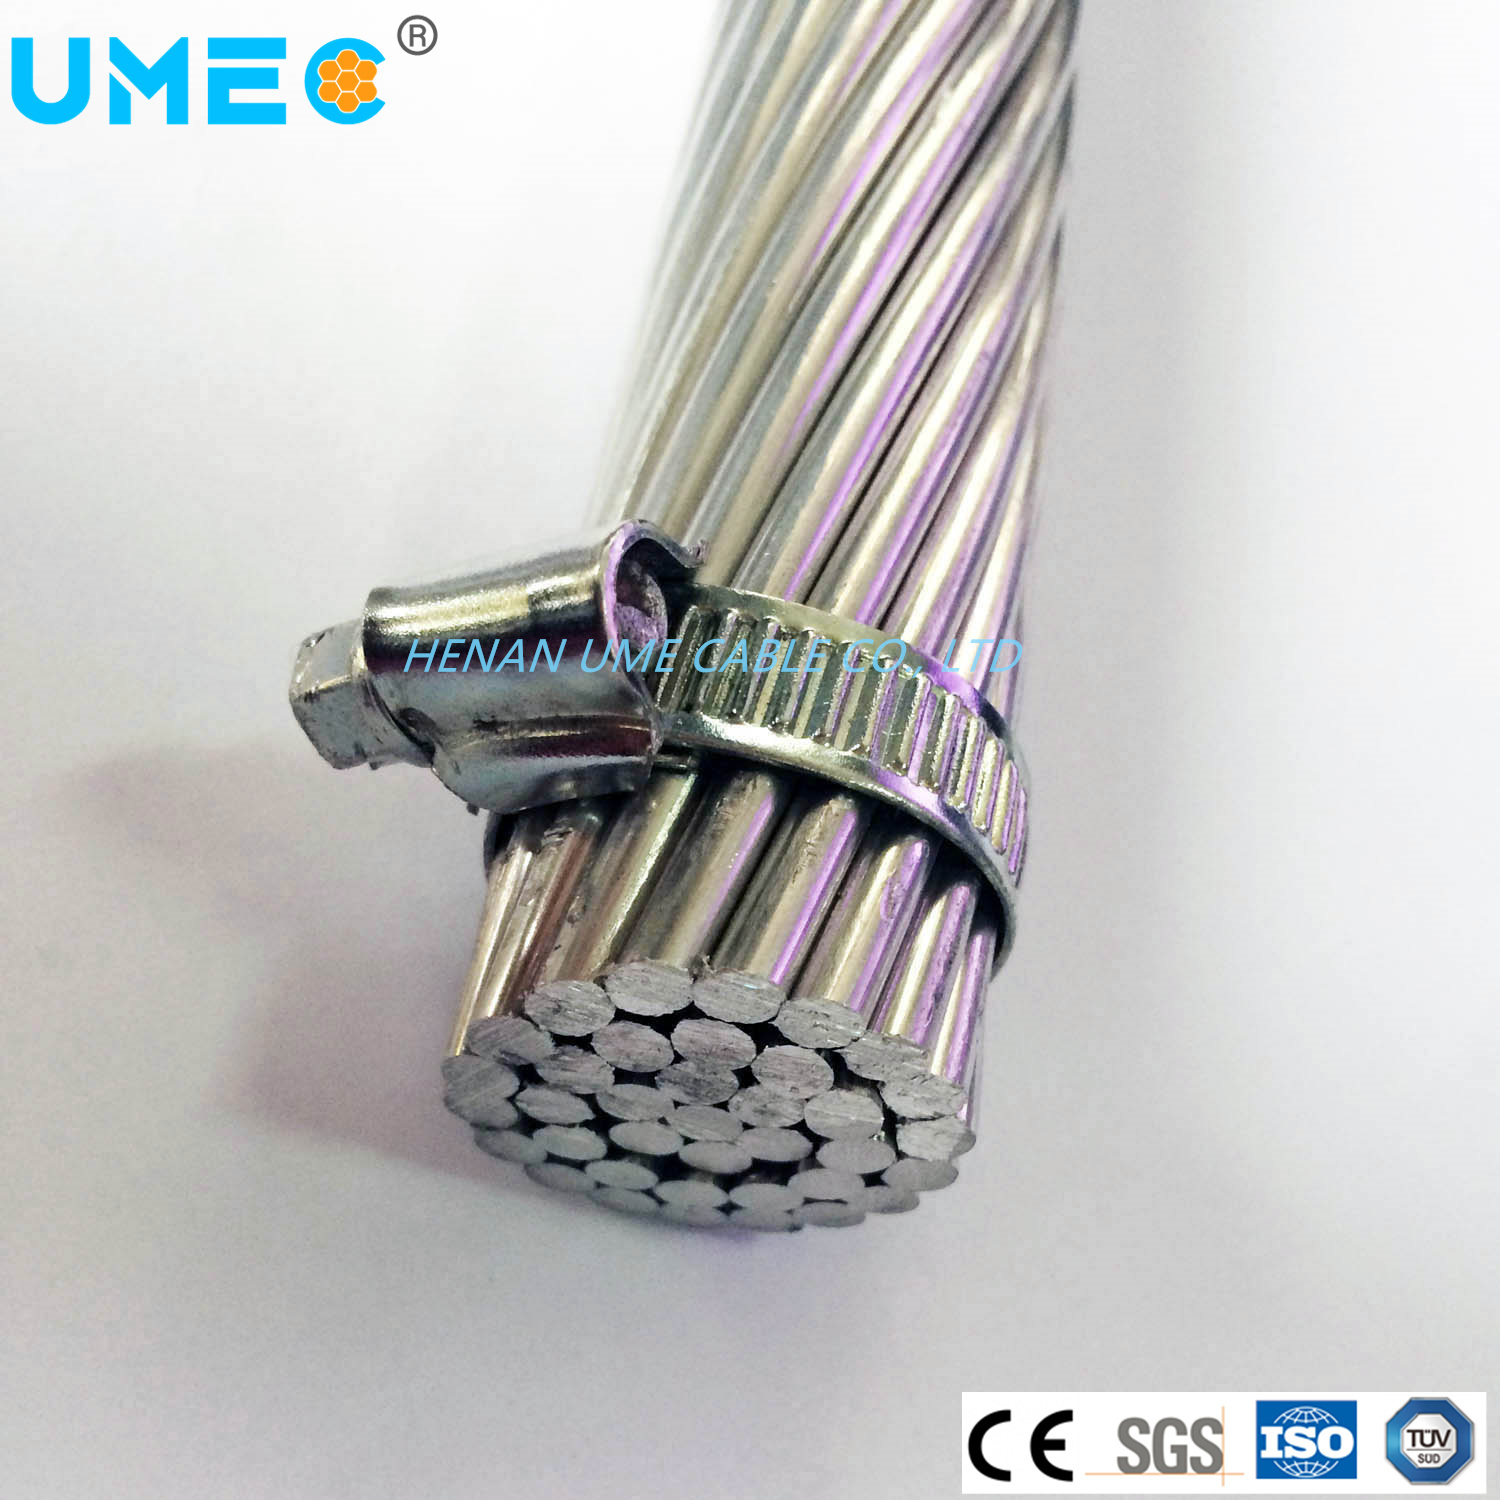 GB/T1179-2008 Standard Aluminum Conductor Aluminum Alloy Reinforced 10/7 15/10 24/20 40/30 60/45 80/50sqmm Stranded Bare Conductor ACSR